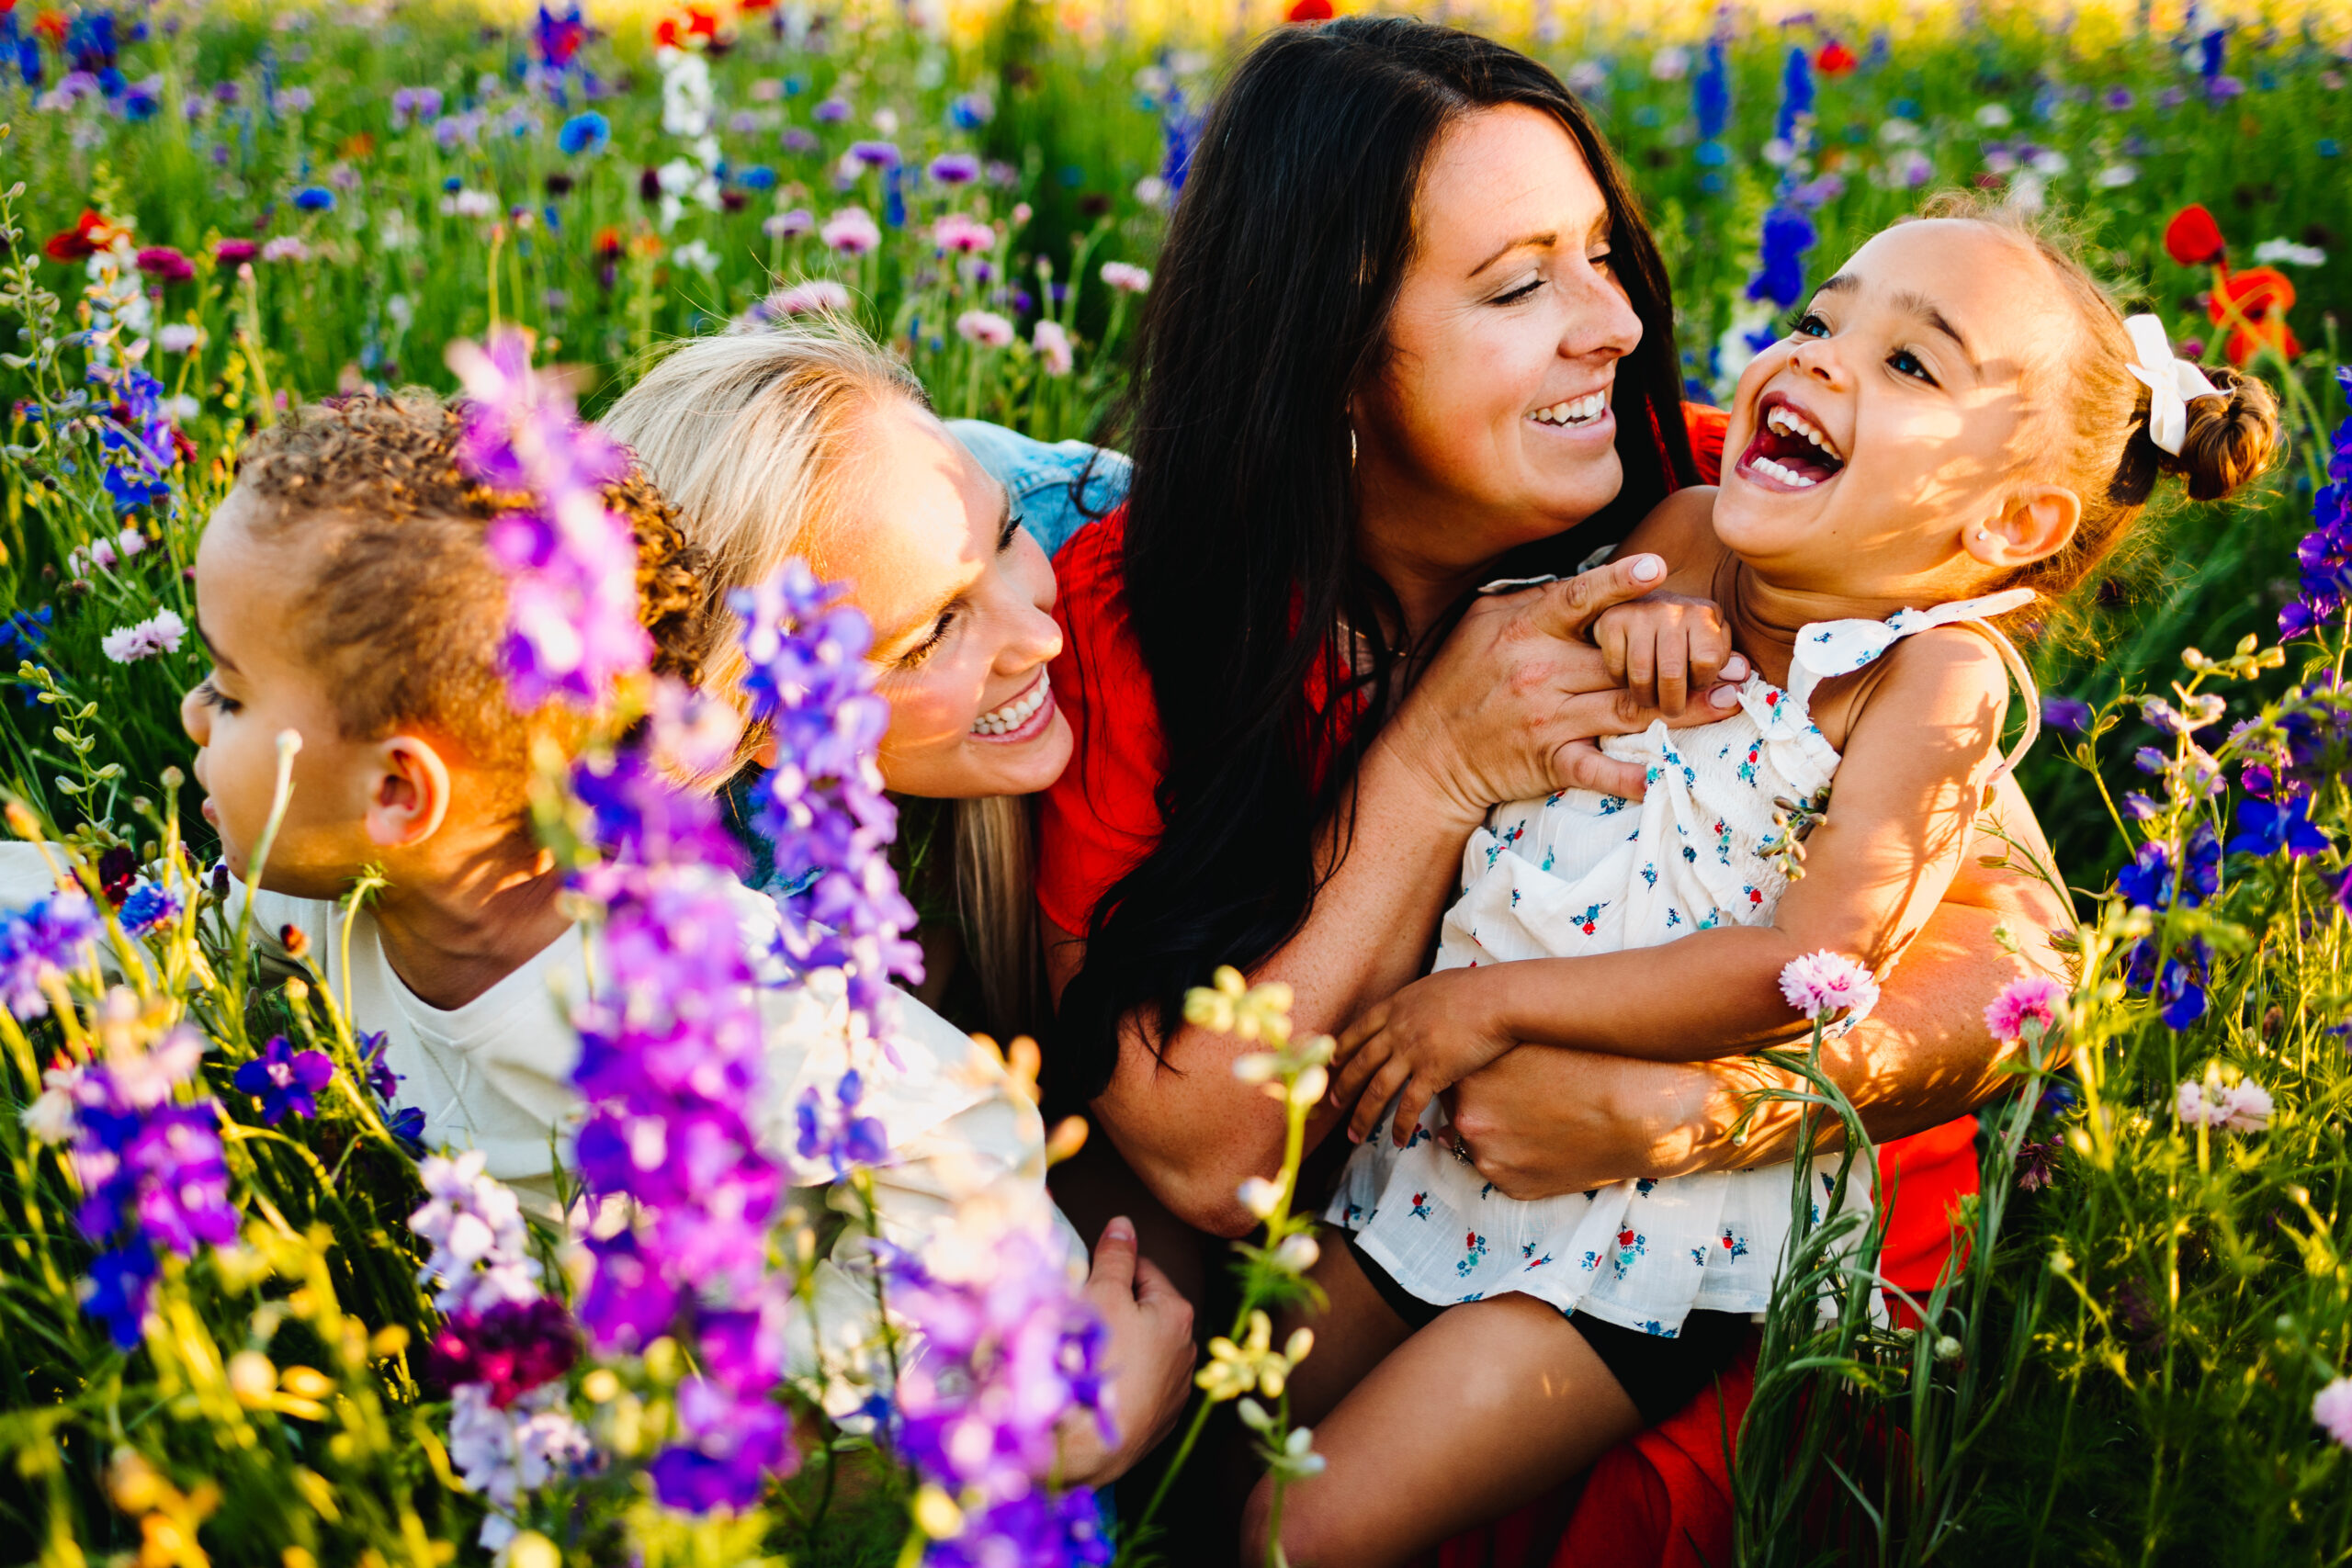 two moms cuddle with their twin toddlers in a wildflower field in richardson during a mini session. one mom is tickling her daughter while she laughs